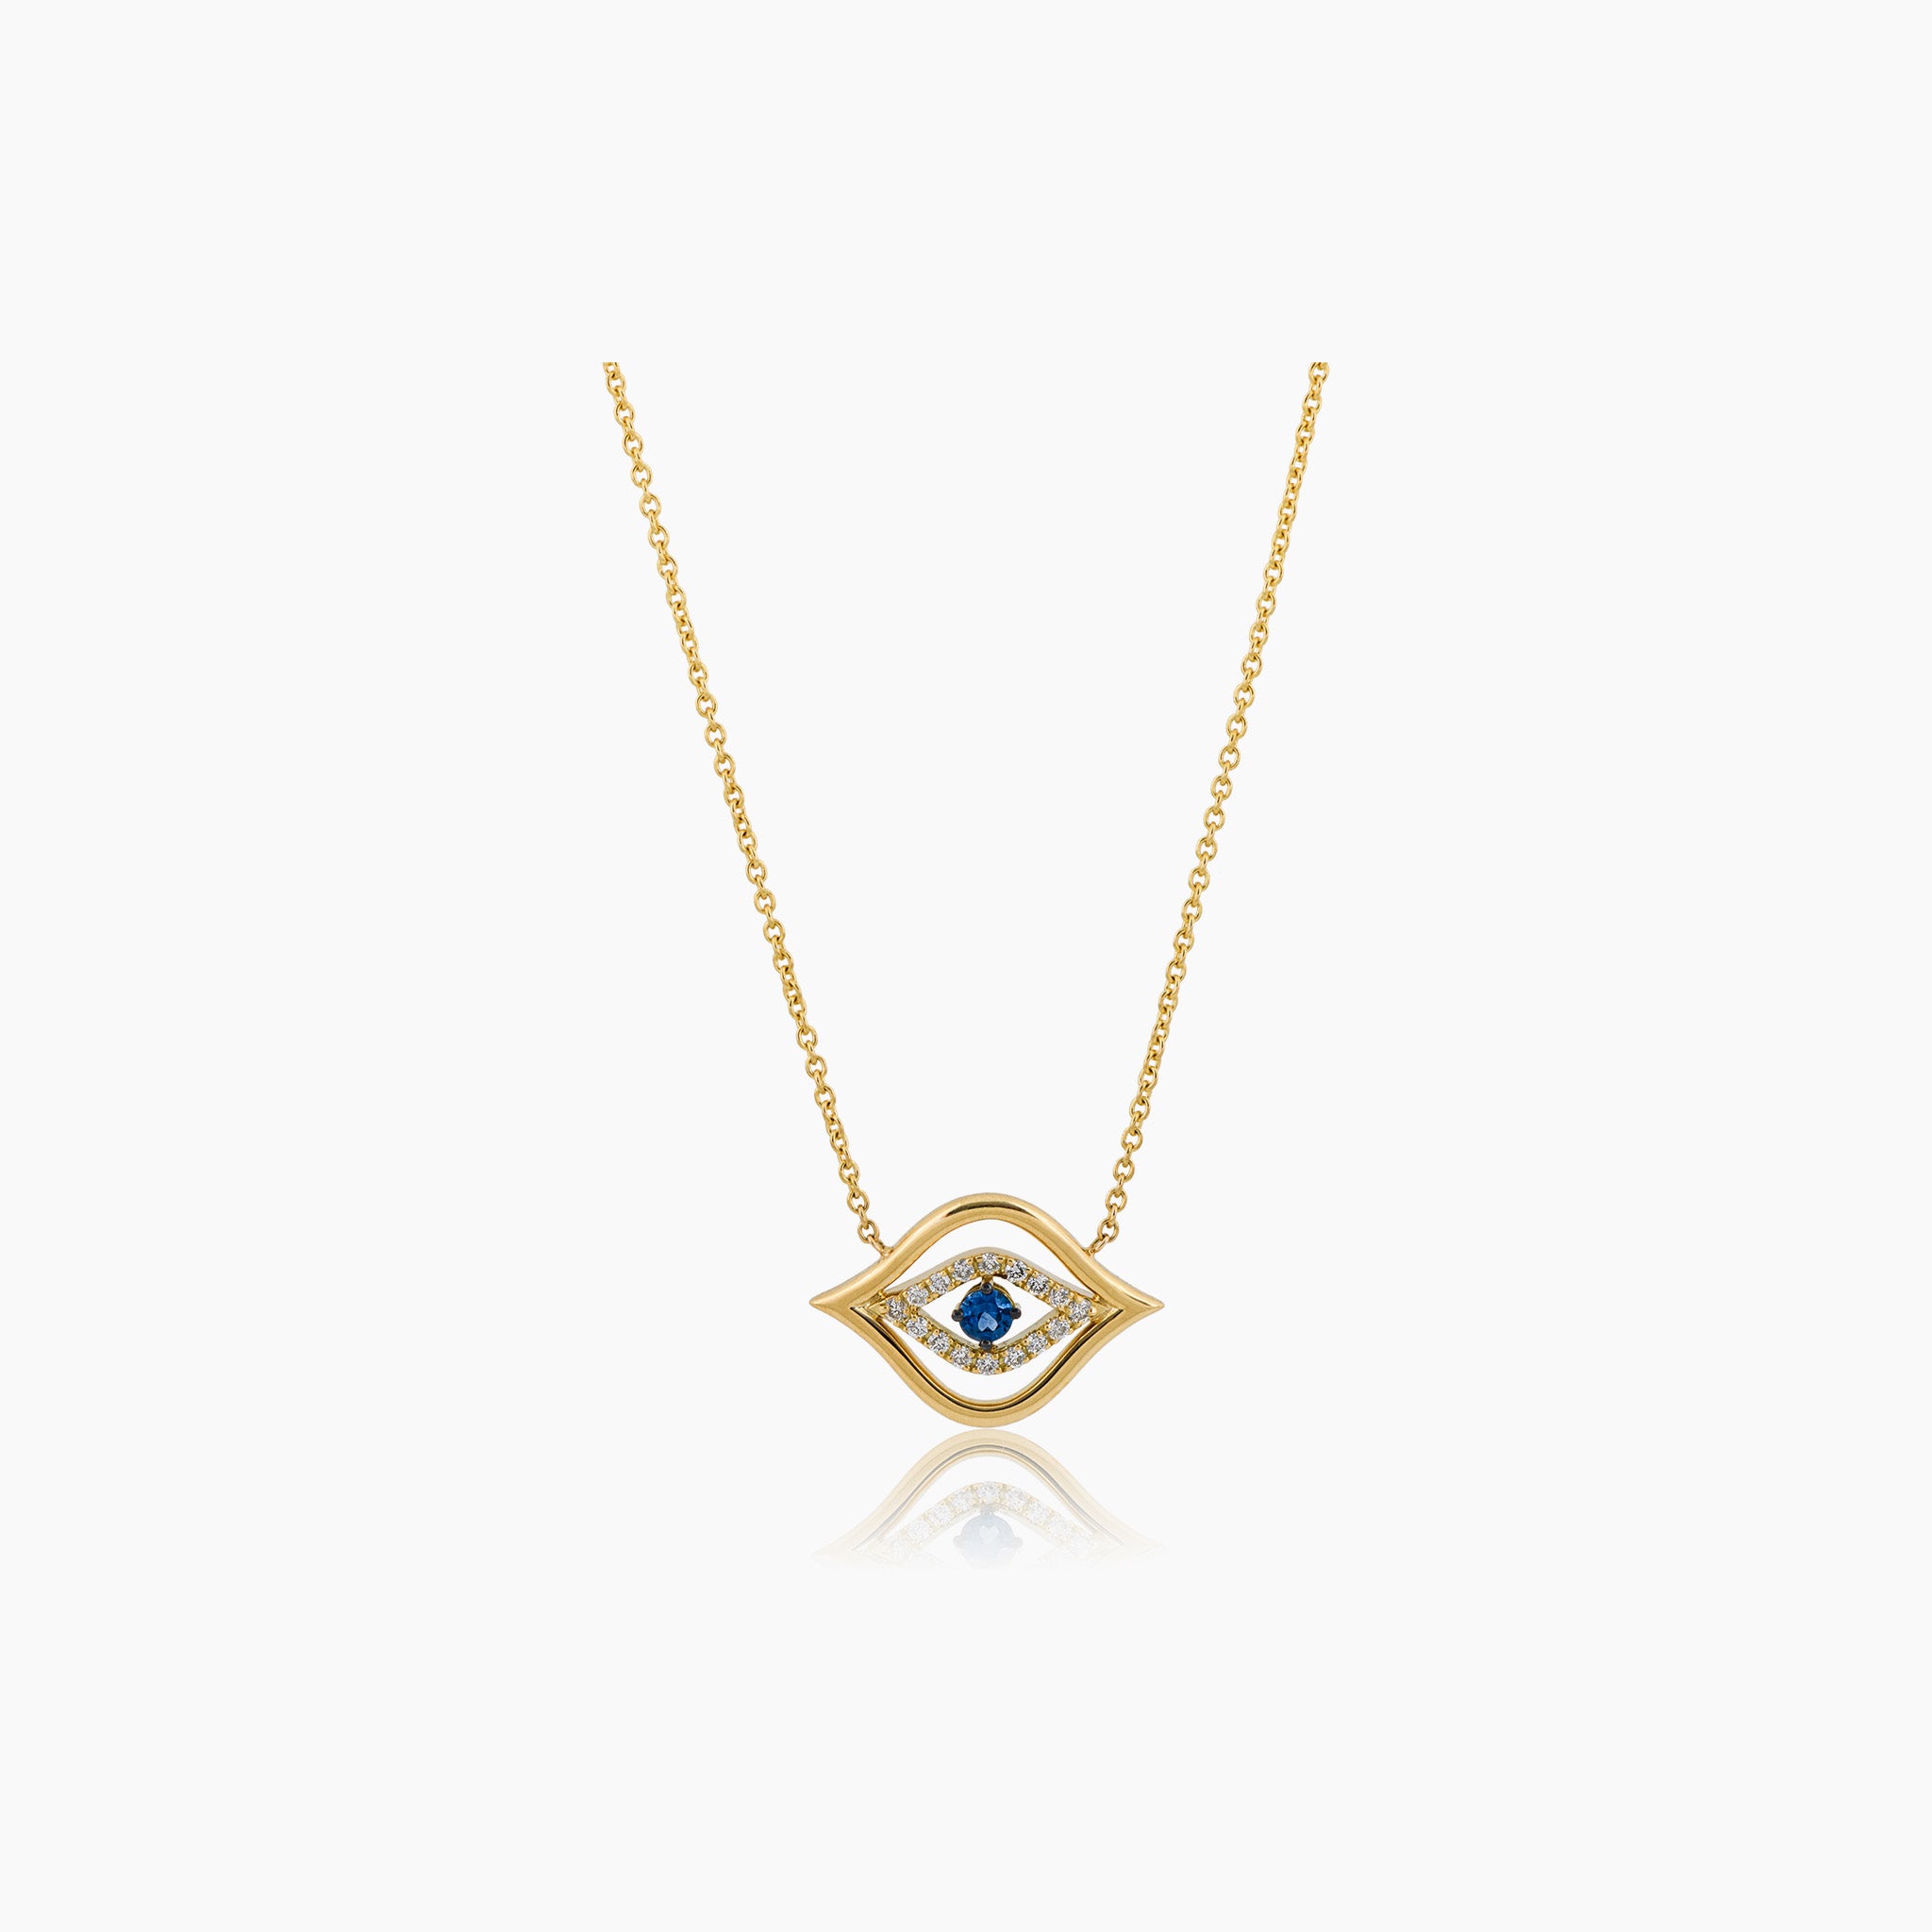  A captivating pendant featuring the protective Evil Eye design adorned with sparkling diamonds and a round brilliant sapphire, showcased against an off-white background.